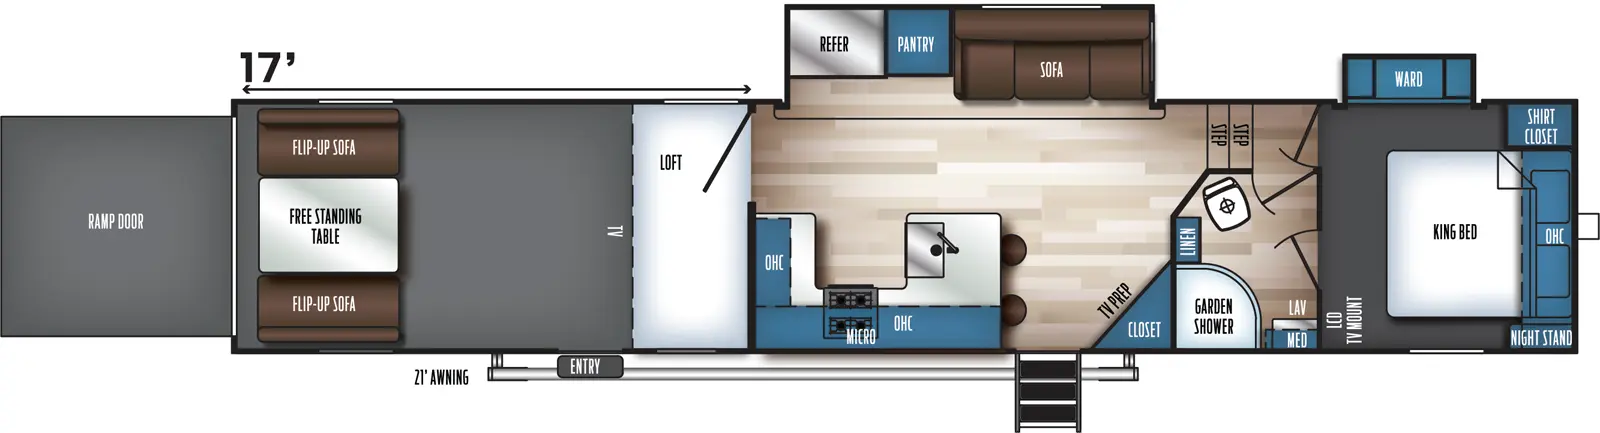 The 357SUT has two slideouts and two entries. Exterior features 21 foot awning and rear ramp door. Interior layout front to back: foot-facing king bed with overhead cabinet, off-door side shirt closet and wardrobe slideout, and door side night stand and LCD TV mount; door side full pass-through bathroom with linen closet and medicine cabinet; steps down to main living area; off-door side slideout with sofa, pantry and refrigerator; door side angled closet and TV prep, entry, peninsula kitchen counter with seats, sink wrap to door side with overhead cabinet, microwave, and cooktop, and continues to wrap to inner wall; rear garage area with loft, TV, second entry, and rear opposing flip-up sofas with free-standing table. Garage dimensions: 17 feet from rear to main living area.